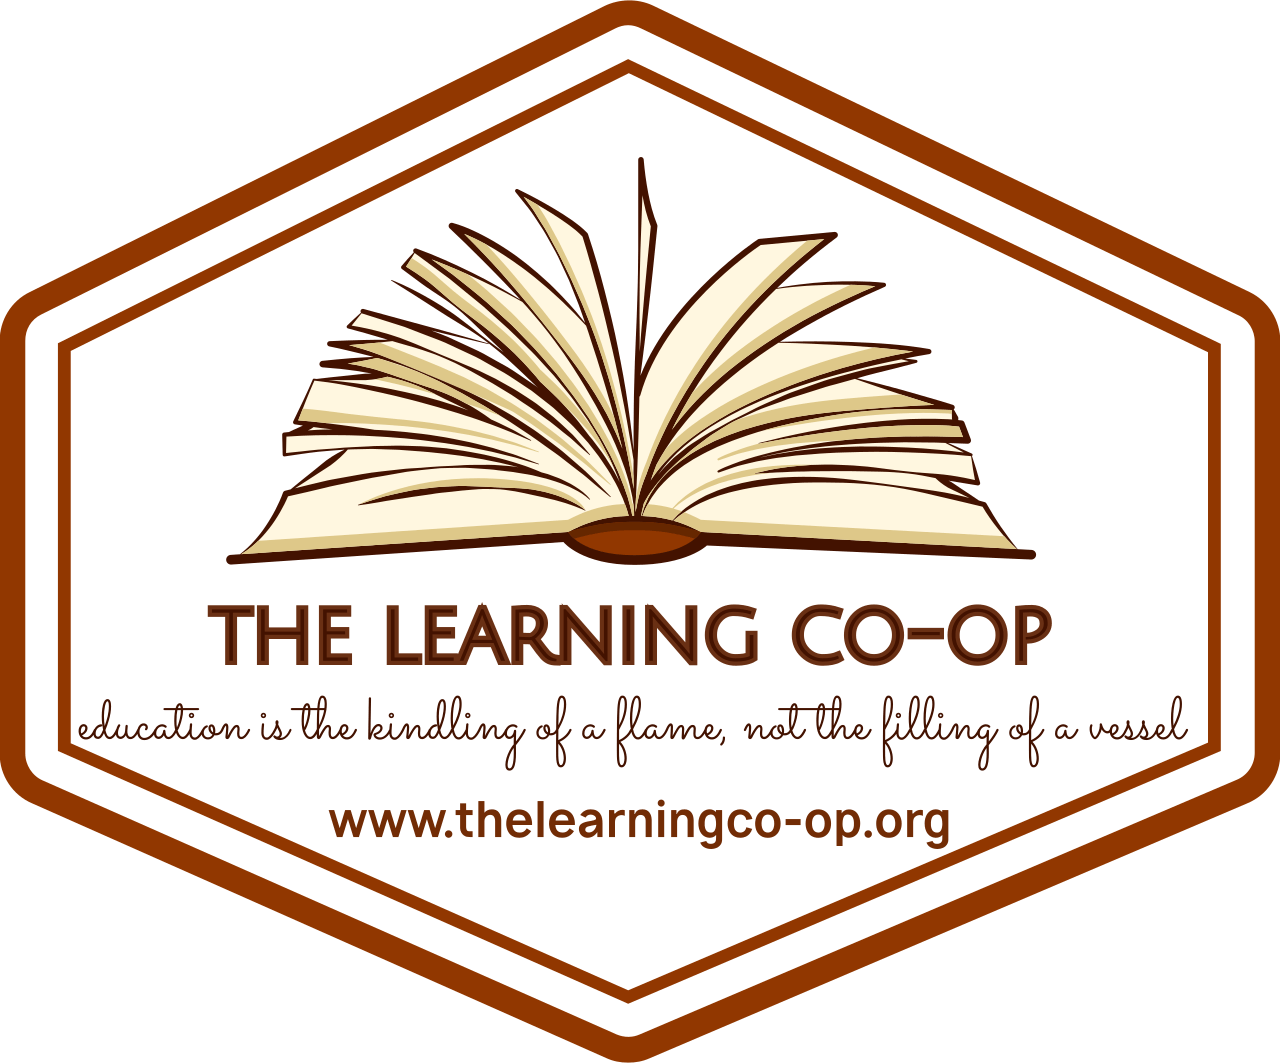 The Learning Co-op  